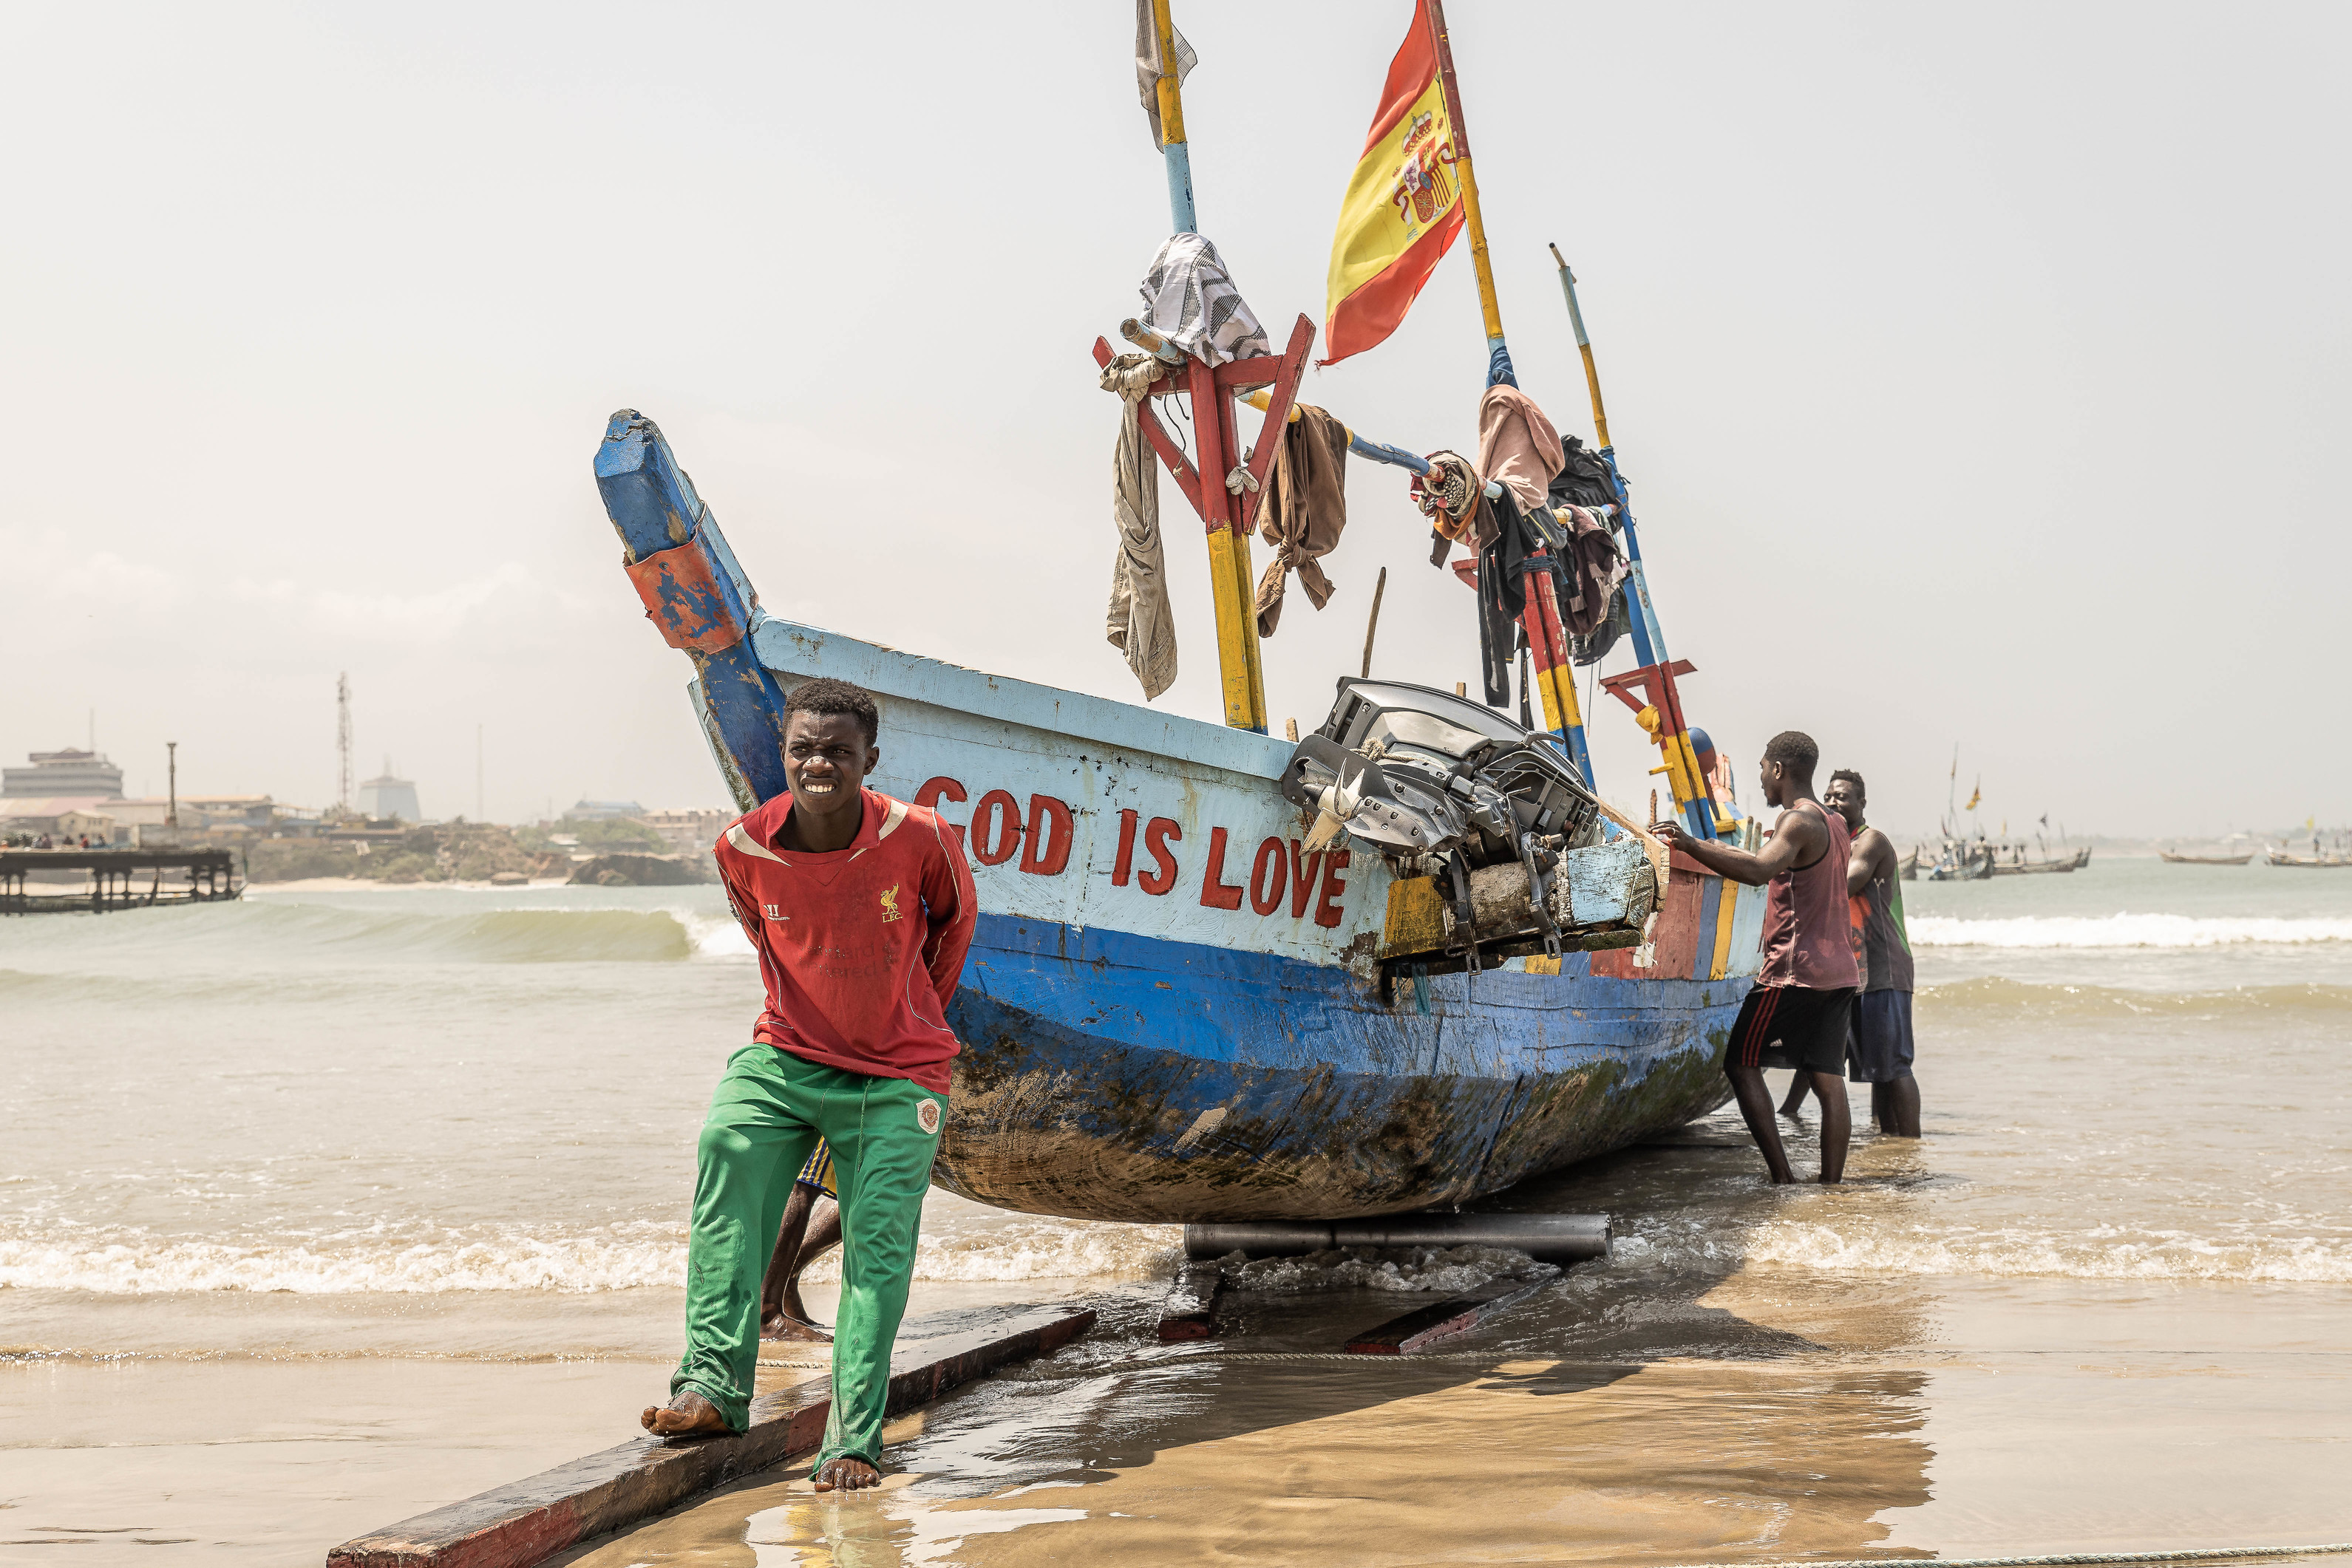 The fishery sector in Ghana, beset with overfishing and a dramatic depletion of stocks, is facing an imminent crisis. There is widespread illegal, unreported and unregulated fishing. The country’s fishery sector creates jobs for 20% of the active labor force. This coastline is next to Jamestown. 